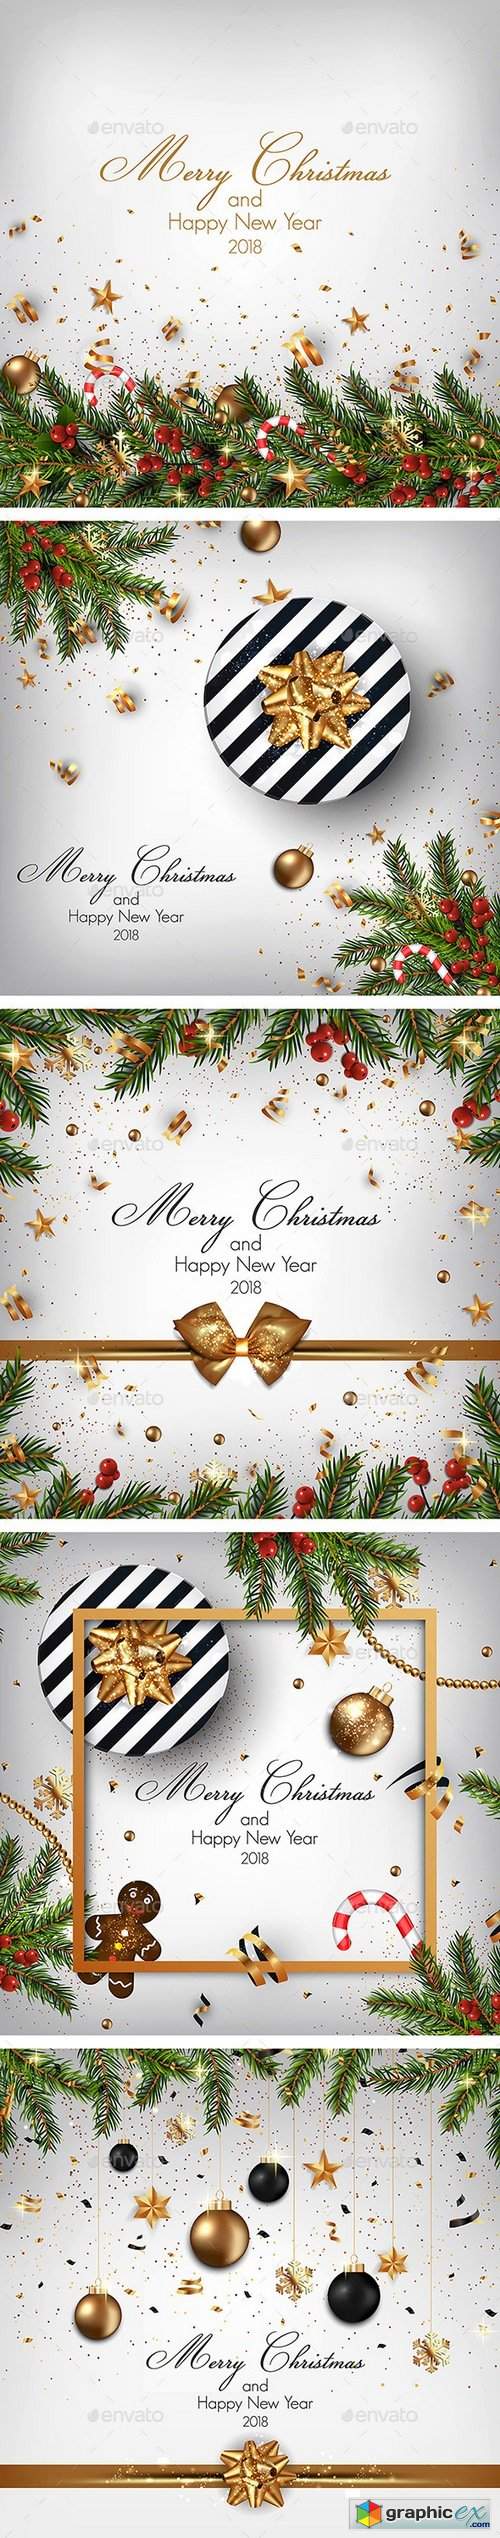 Stylish Modern Merry Christmas and Happy New Year 2018 cards